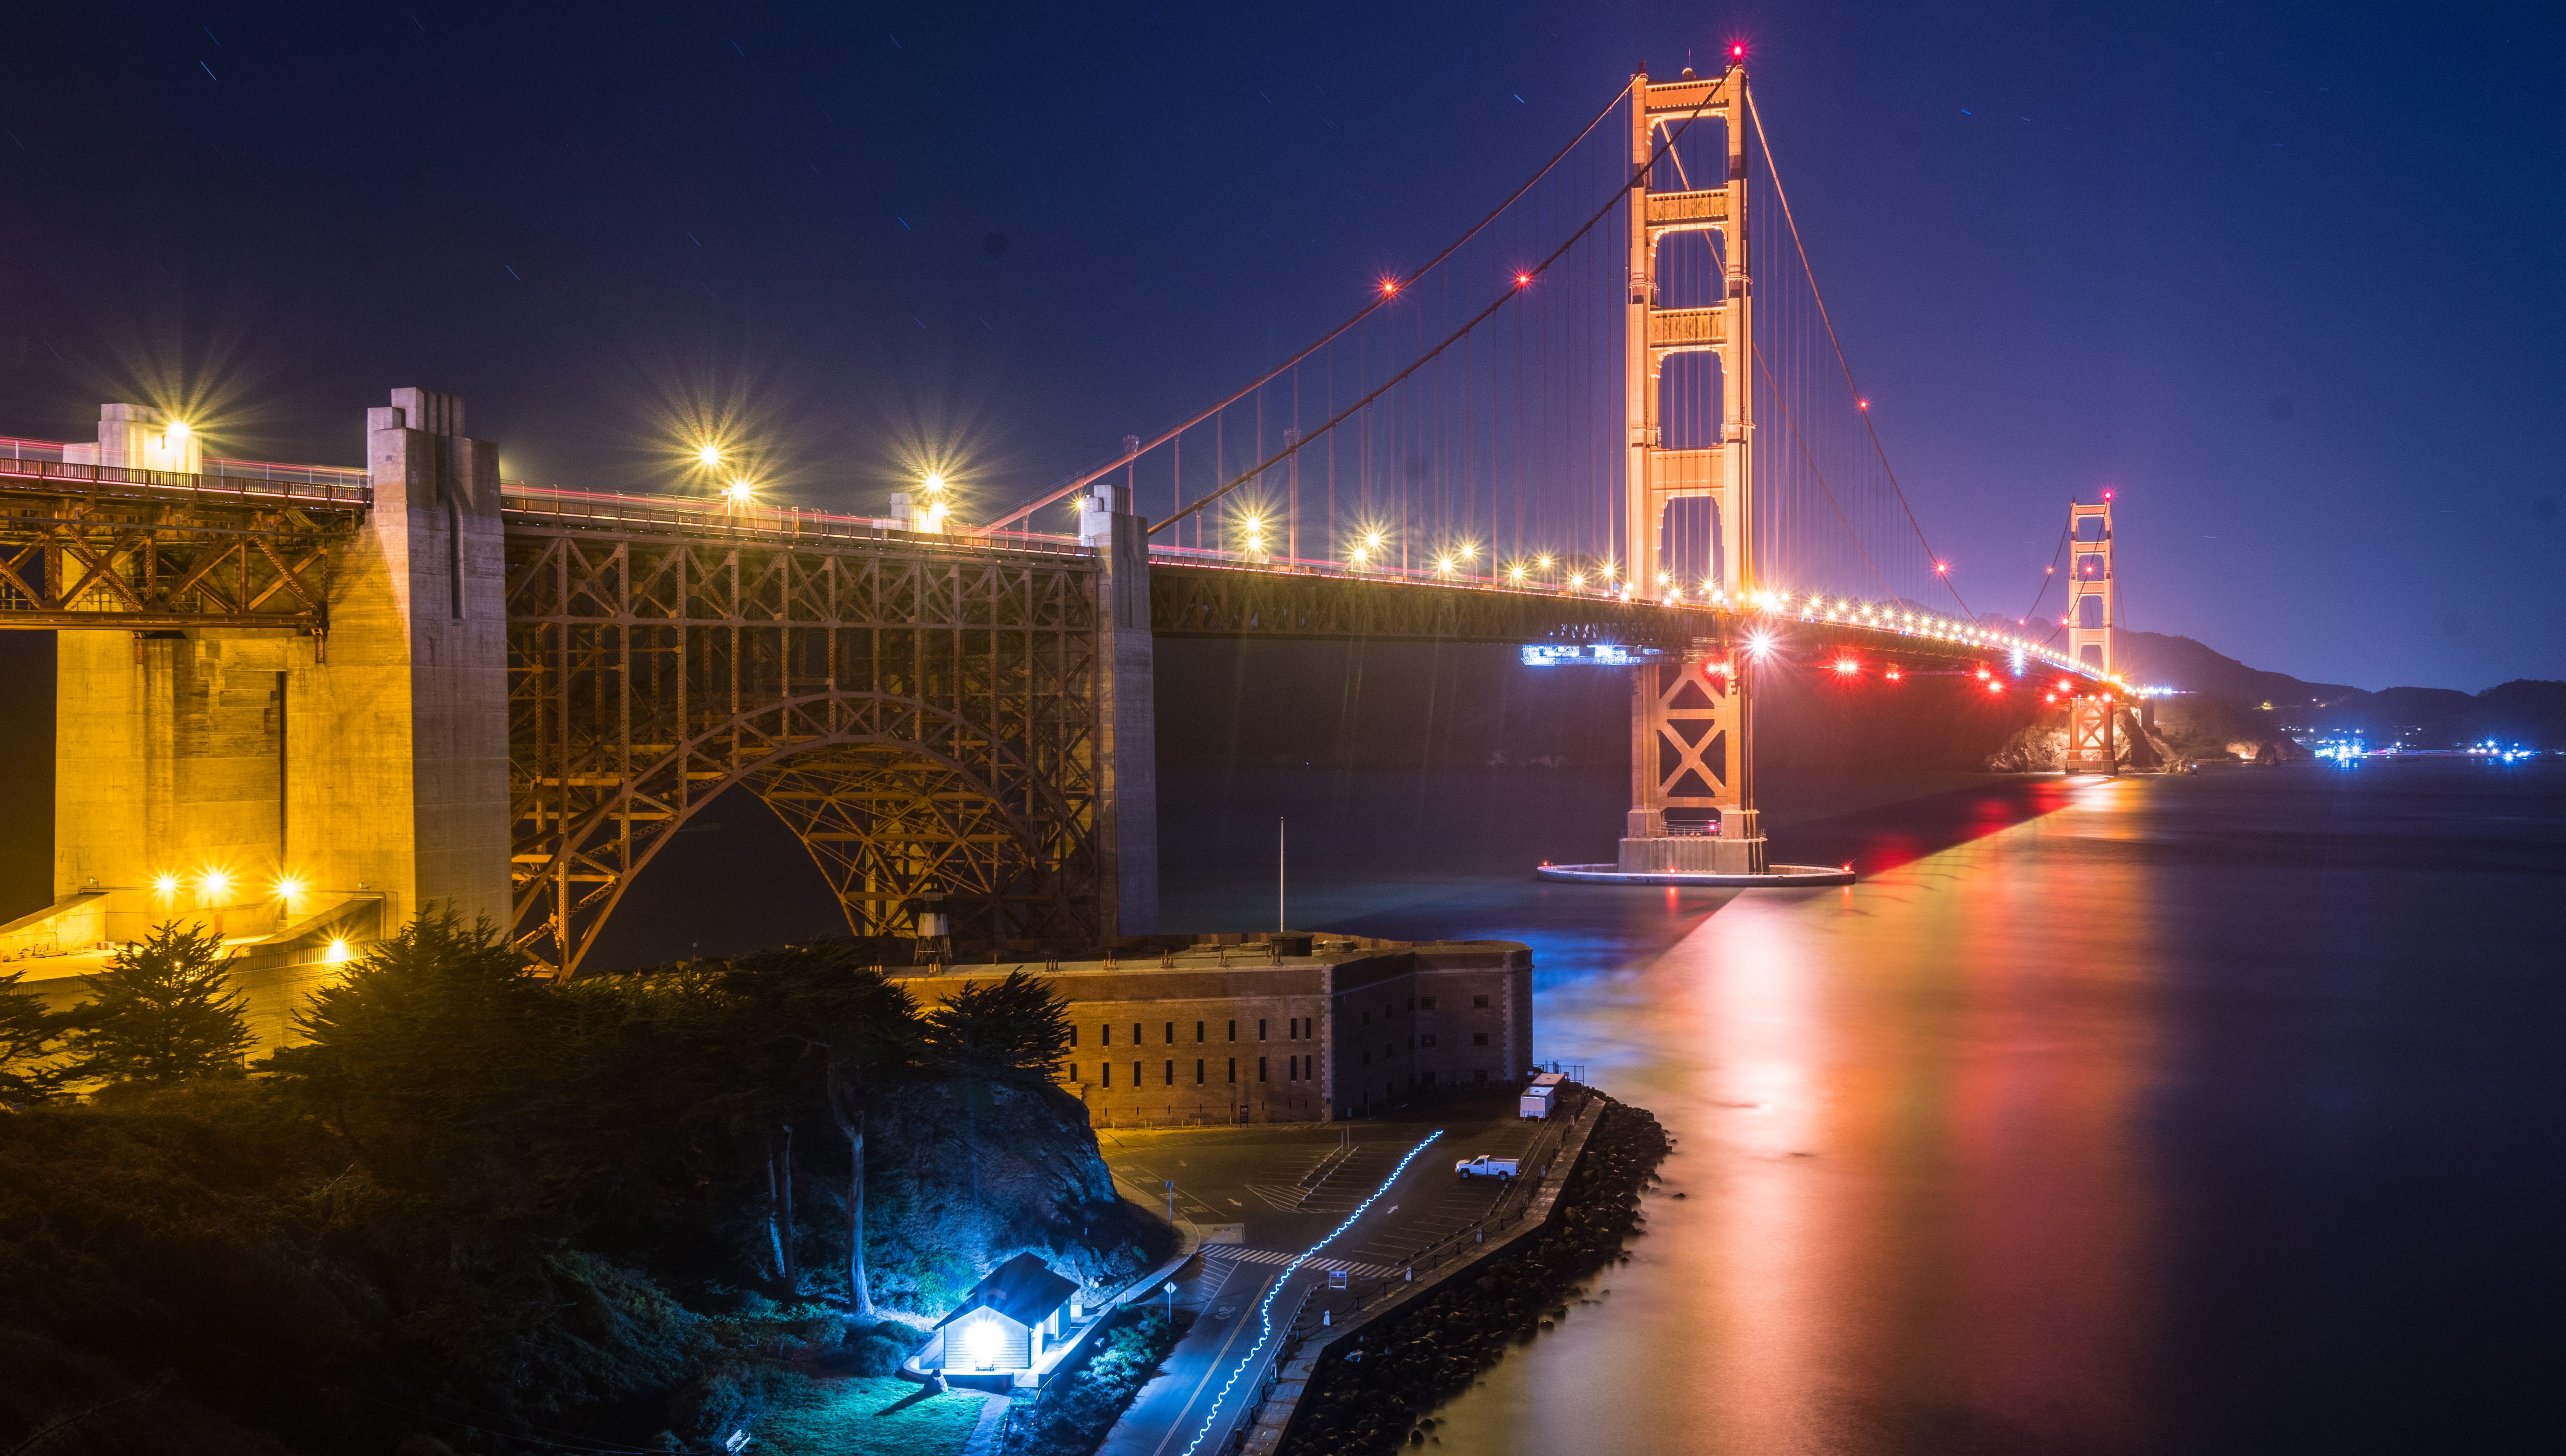 Paint with Light at the Presidio - Night Photography Workshop at a National Historic Landmark